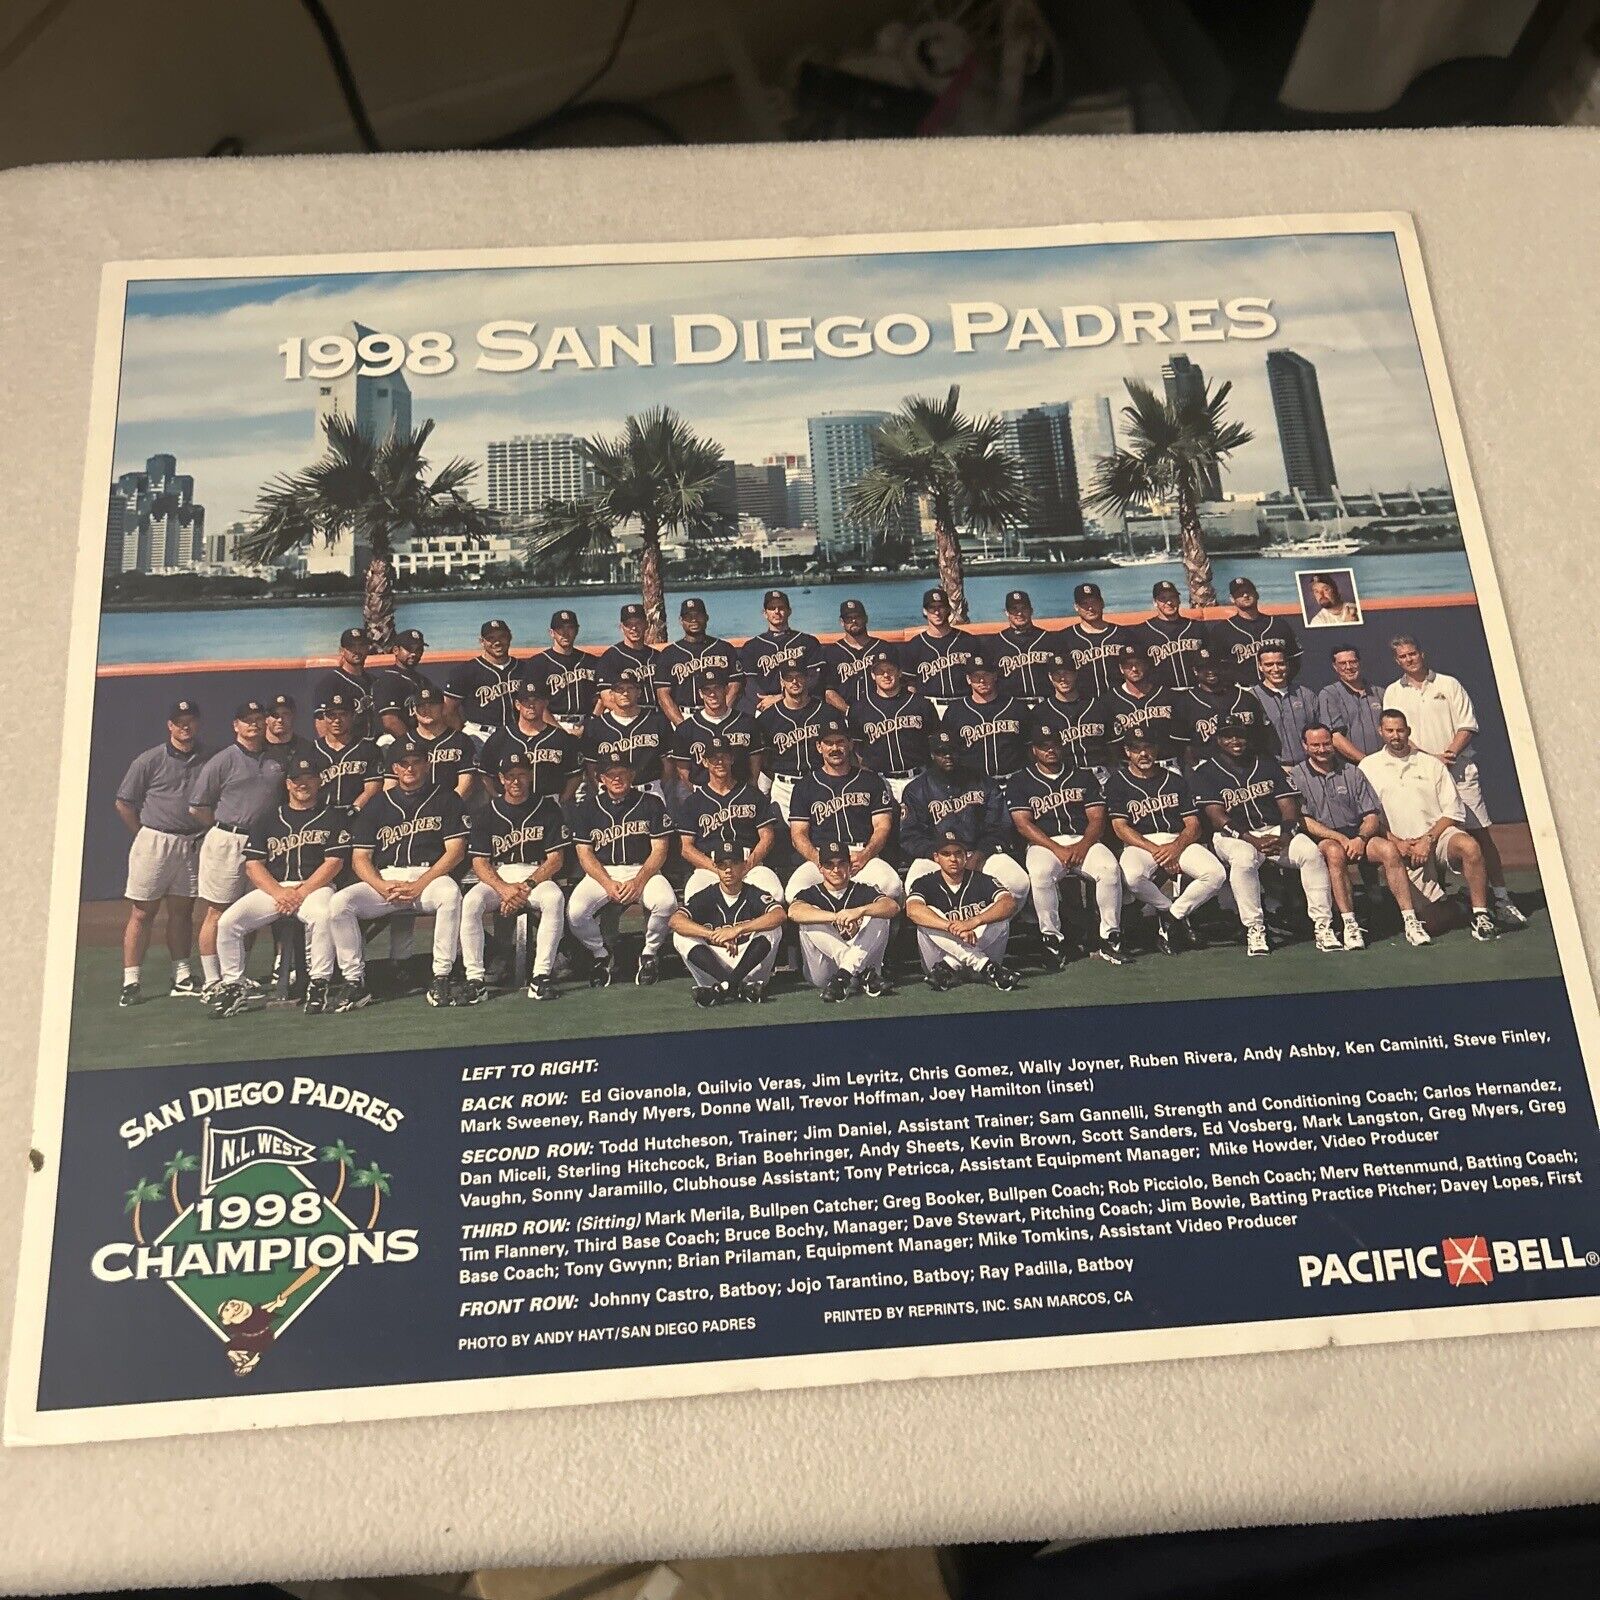 1998 San Diego Padres Team Picture Photo Poster large display 13.5” X 11.5”